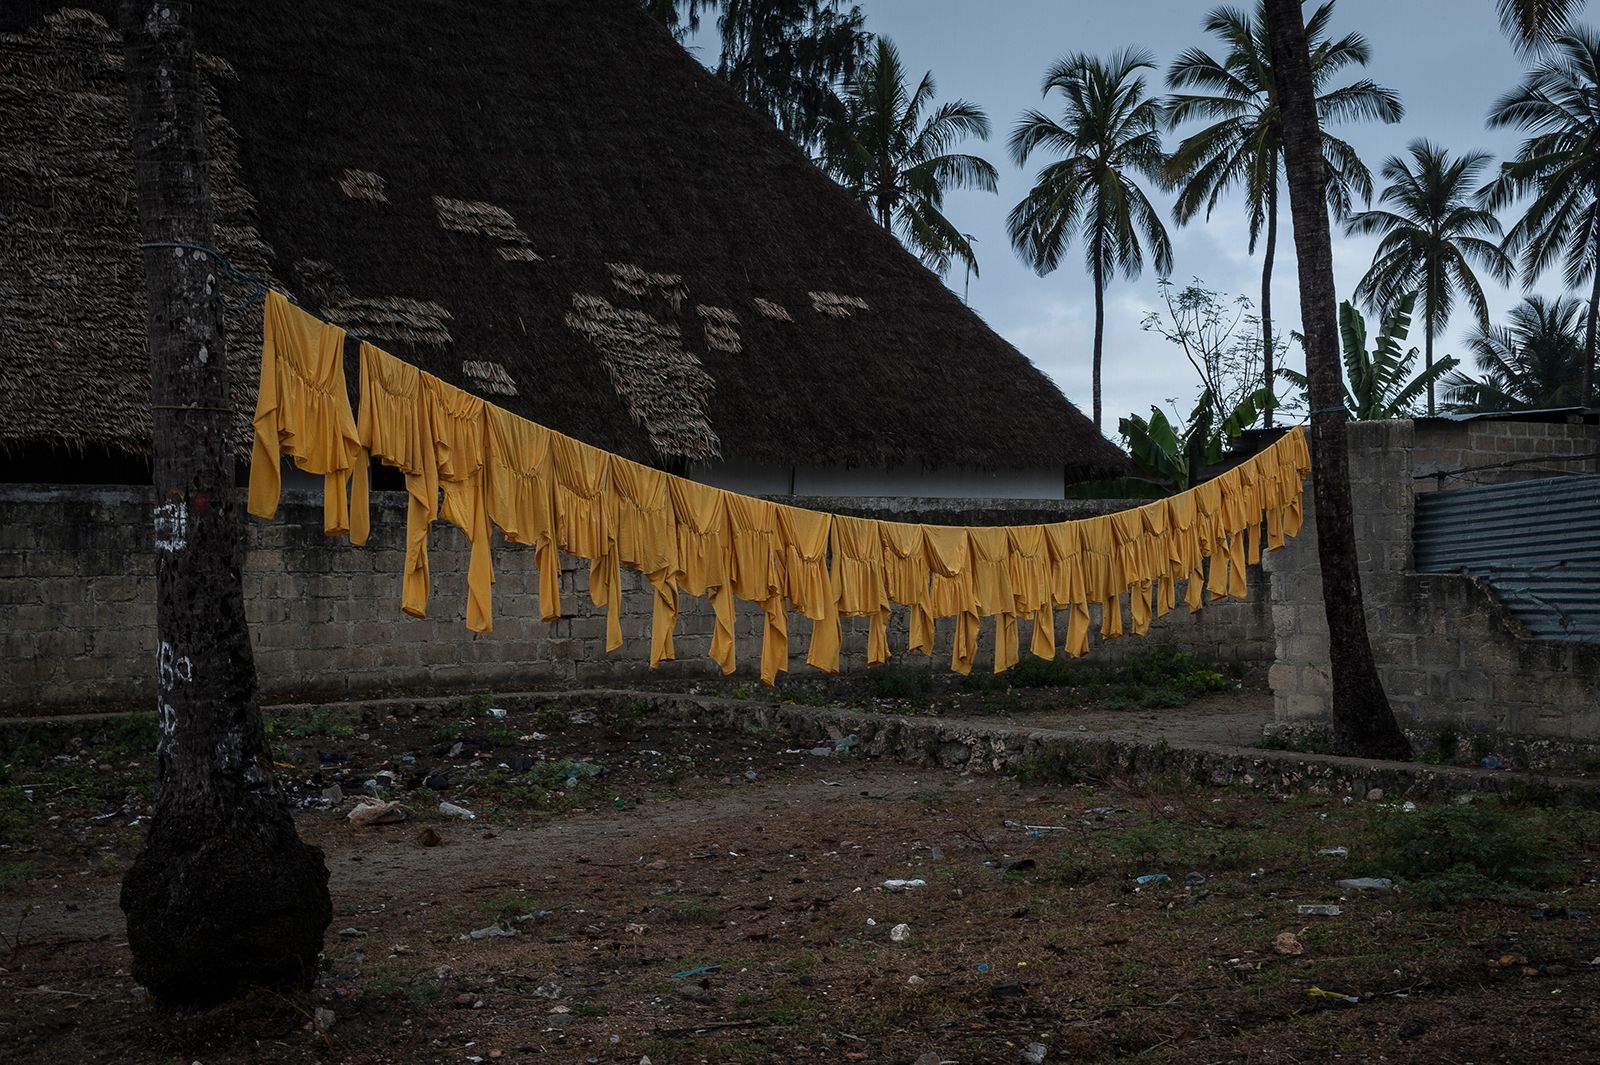 © Anna Boyiazis - Full-length swimsuit tops hang on a clothesline outside the home of Kazija’s mother in Nungwi, Zanzibar.